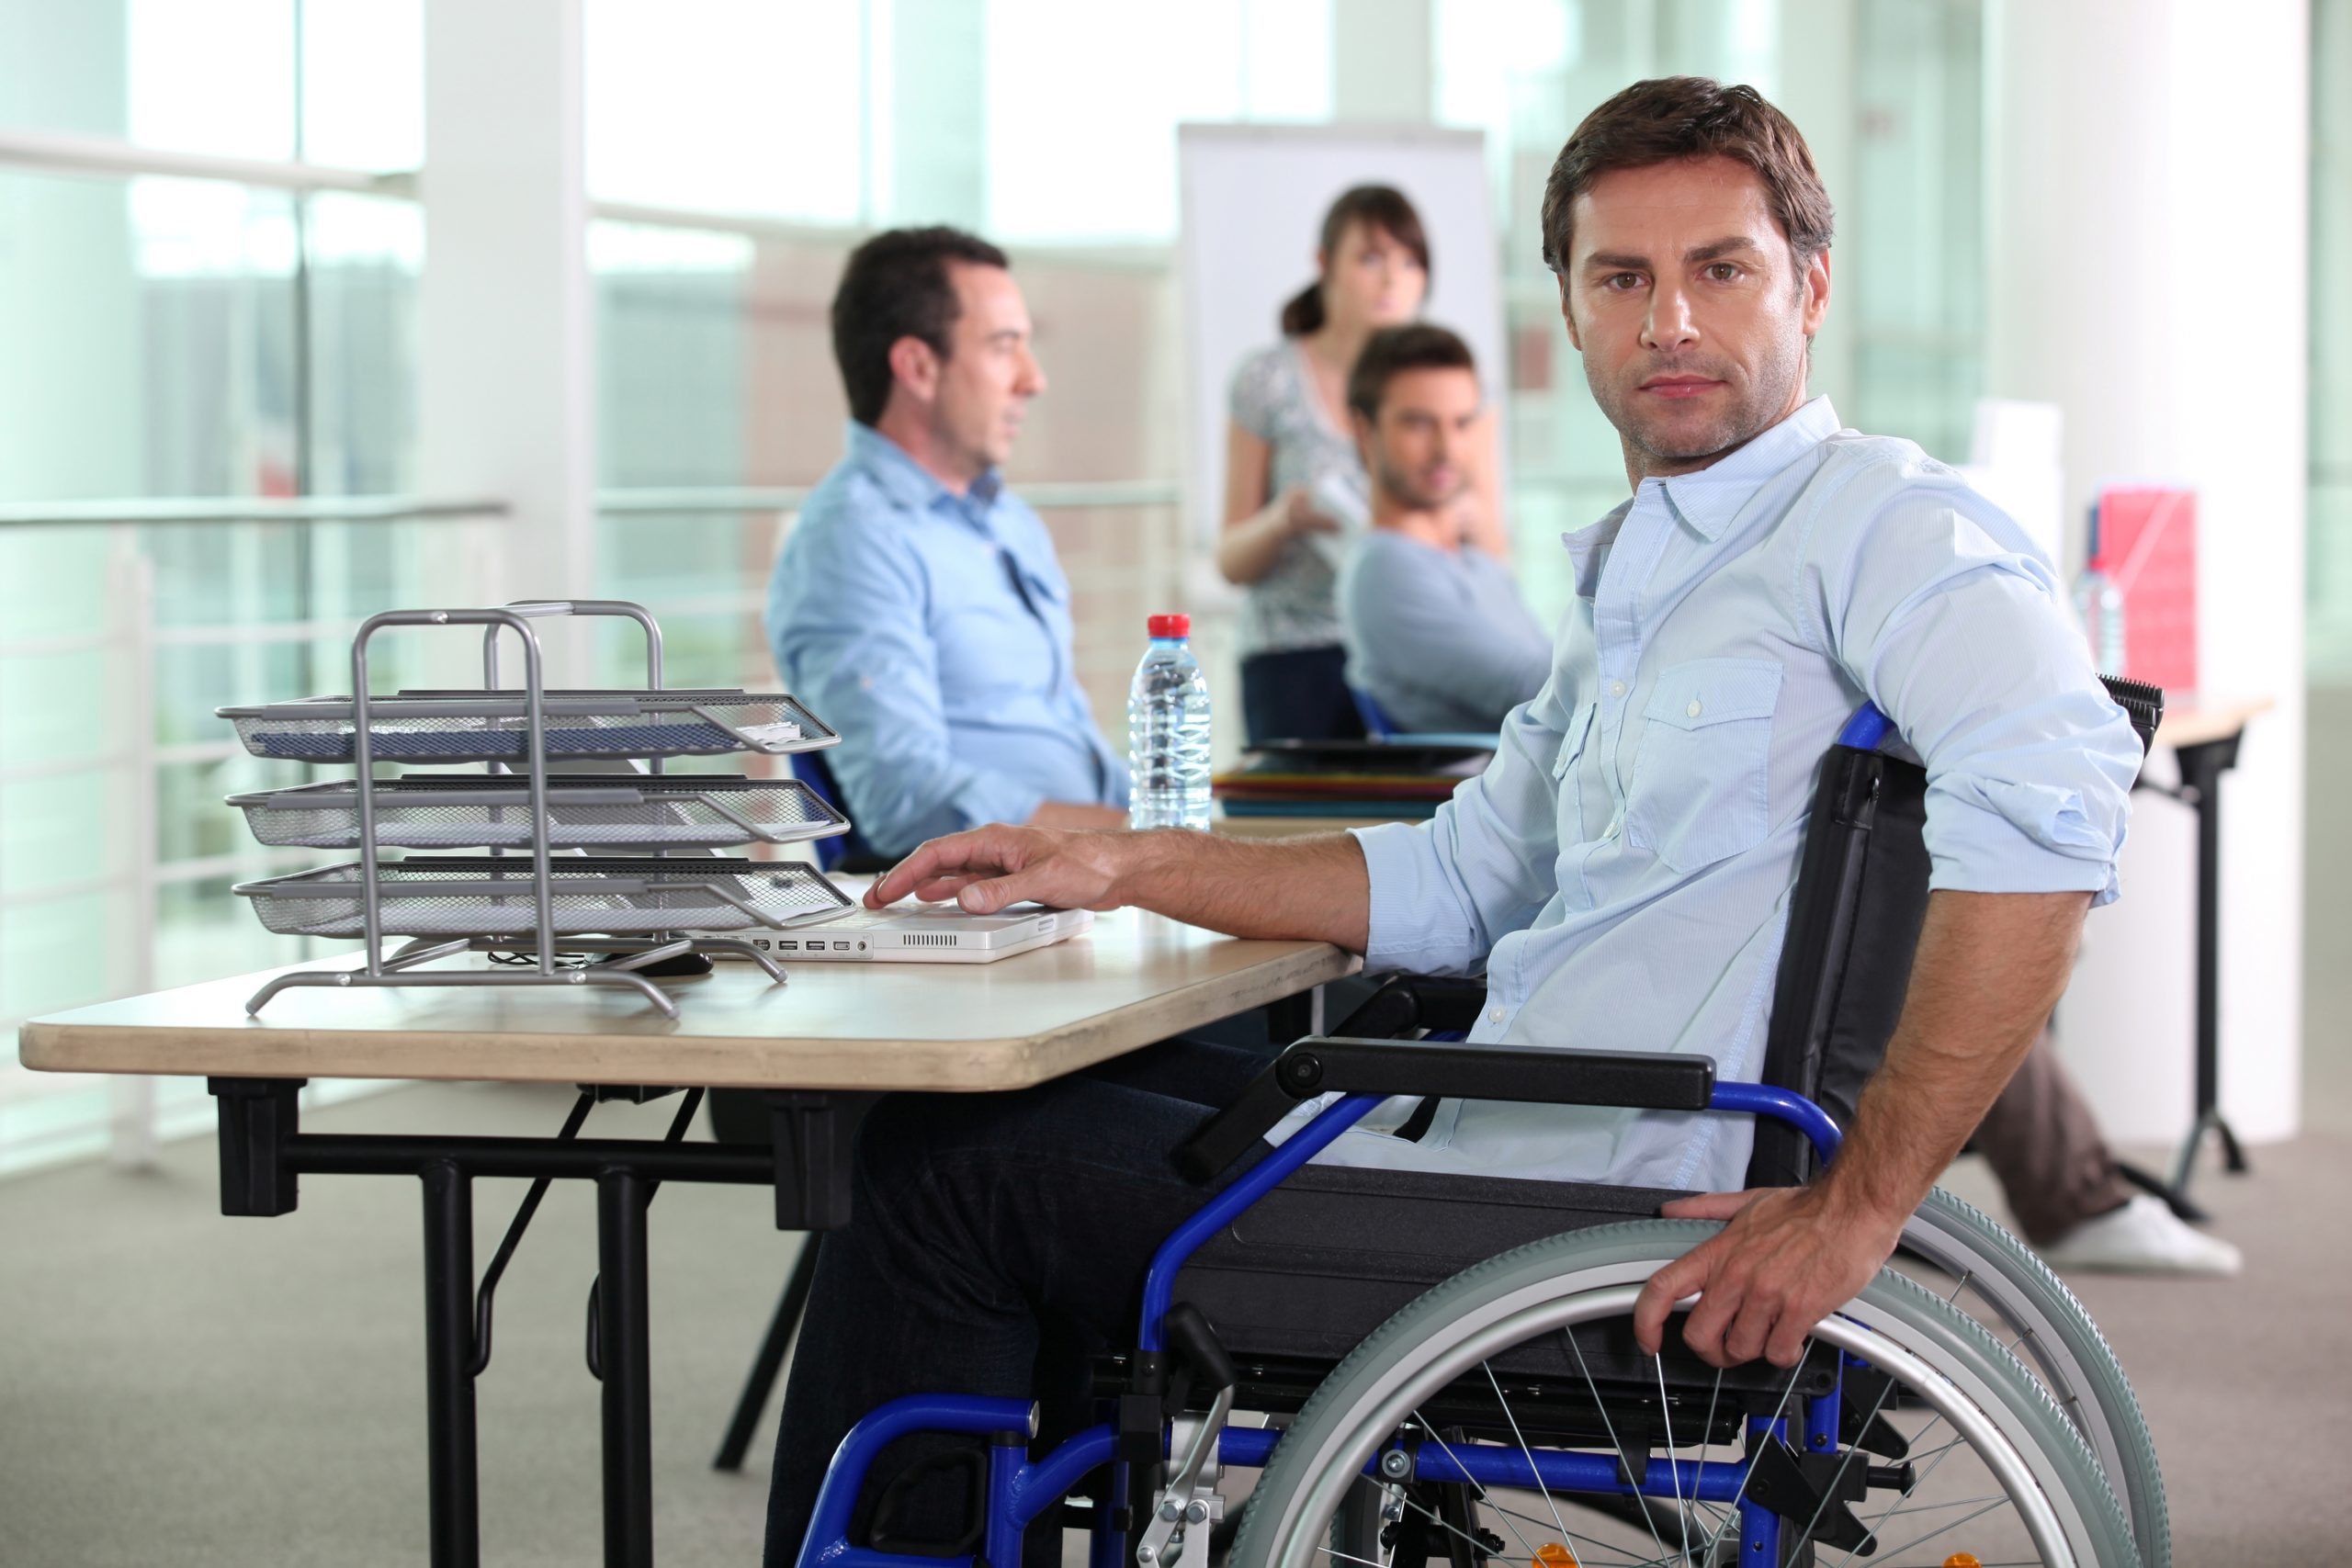 What Duty Do Employers Have to Disabled Employees?